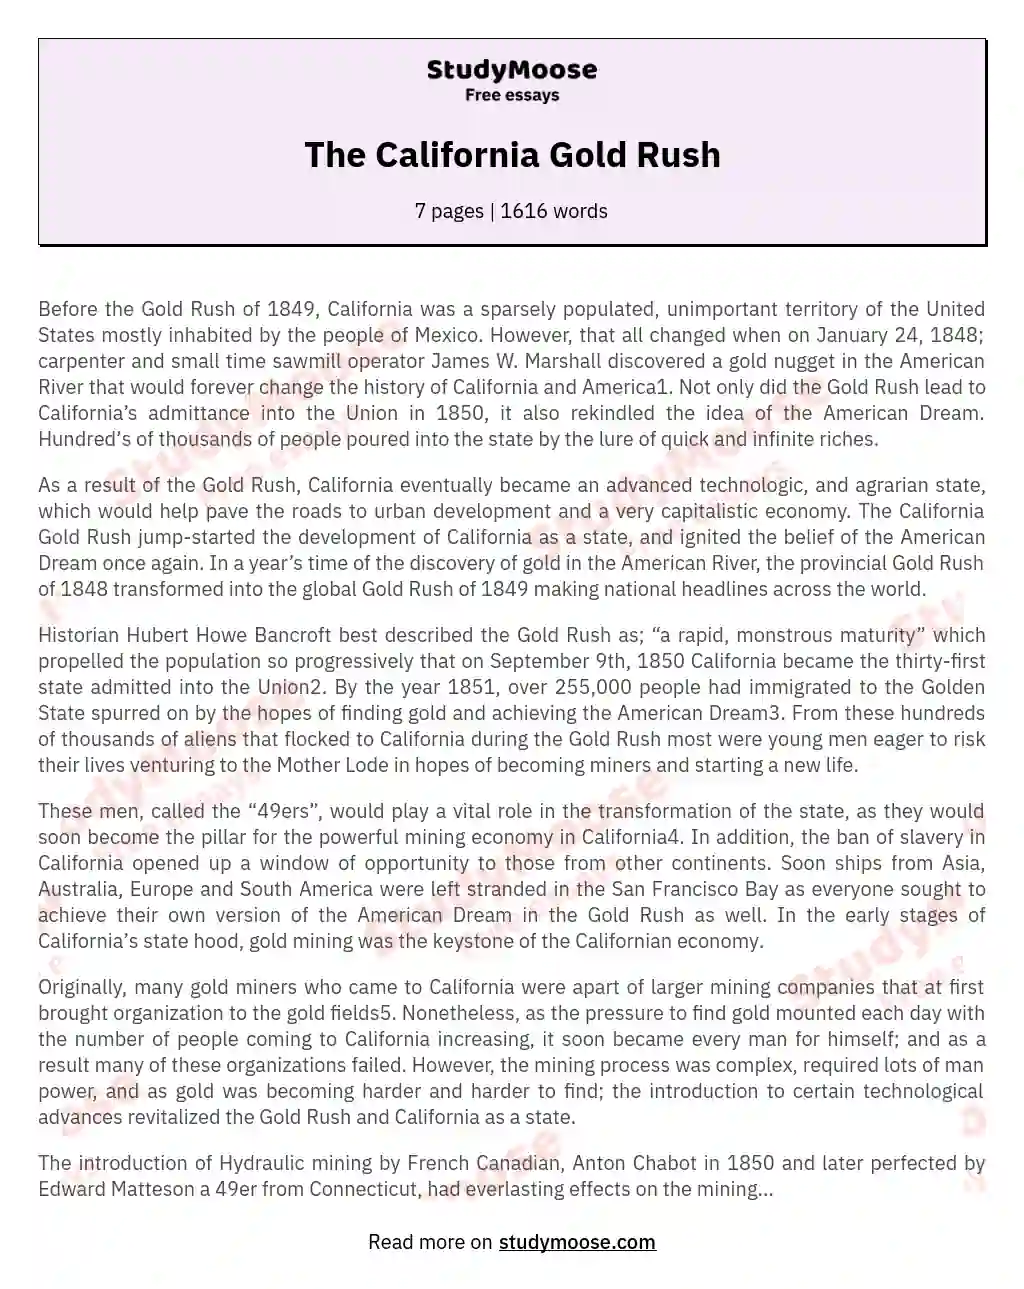 The California Gold Rush: Shaping a State essay